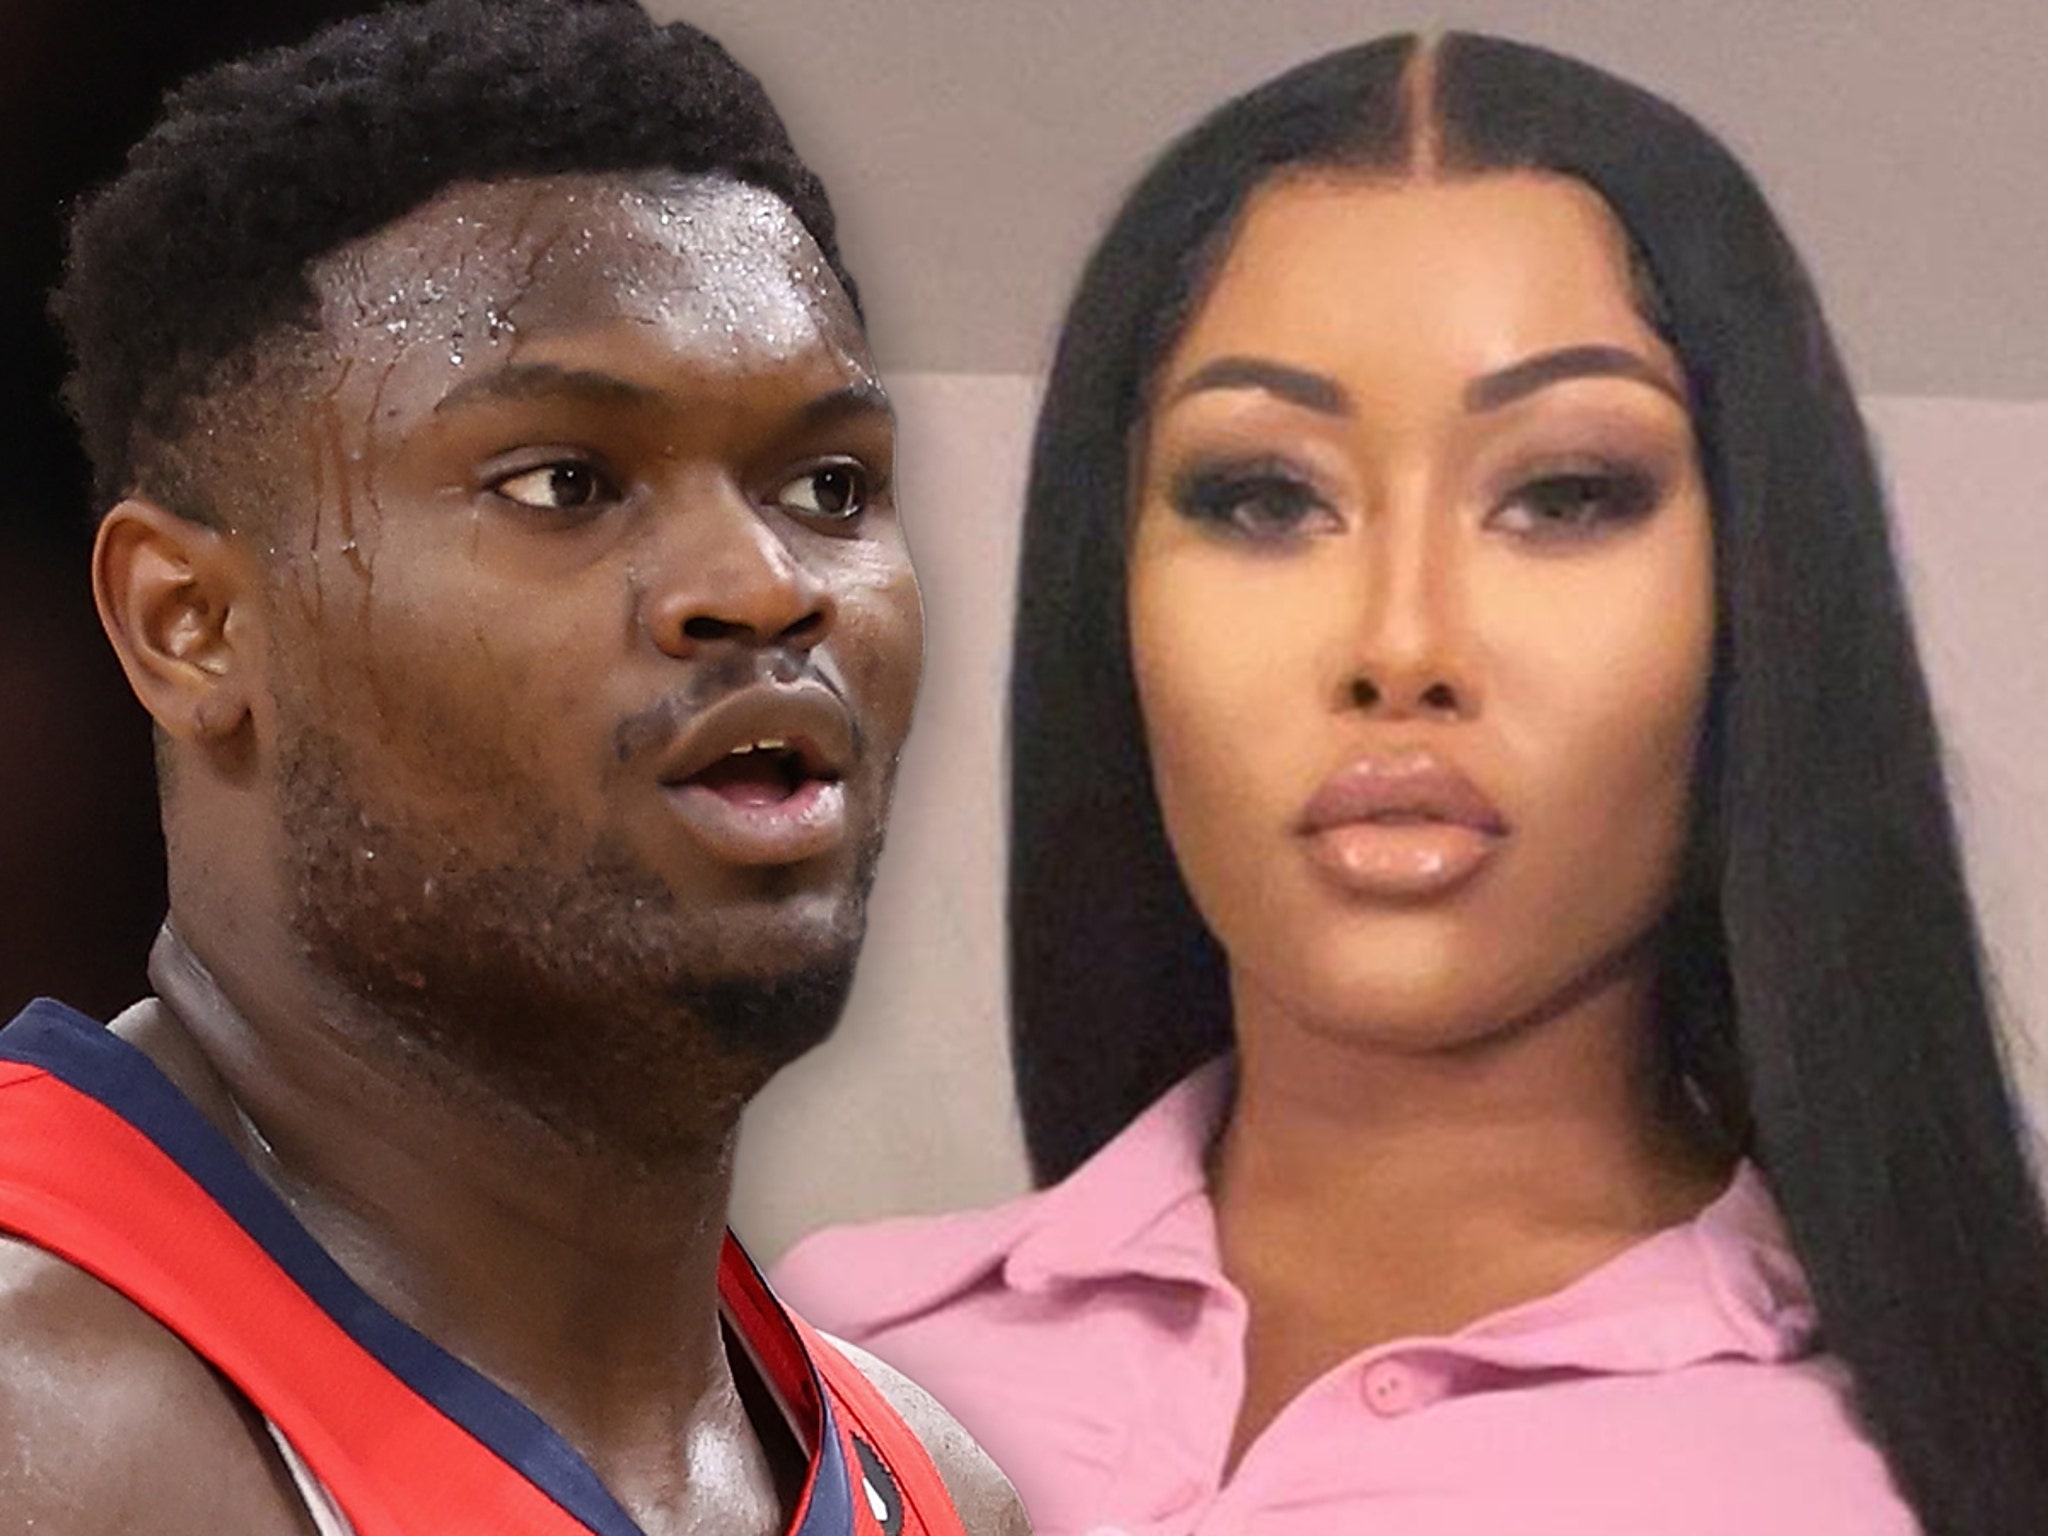 Porn Star: Zion Williamson Cheated On Moriah Mills With Ameekha